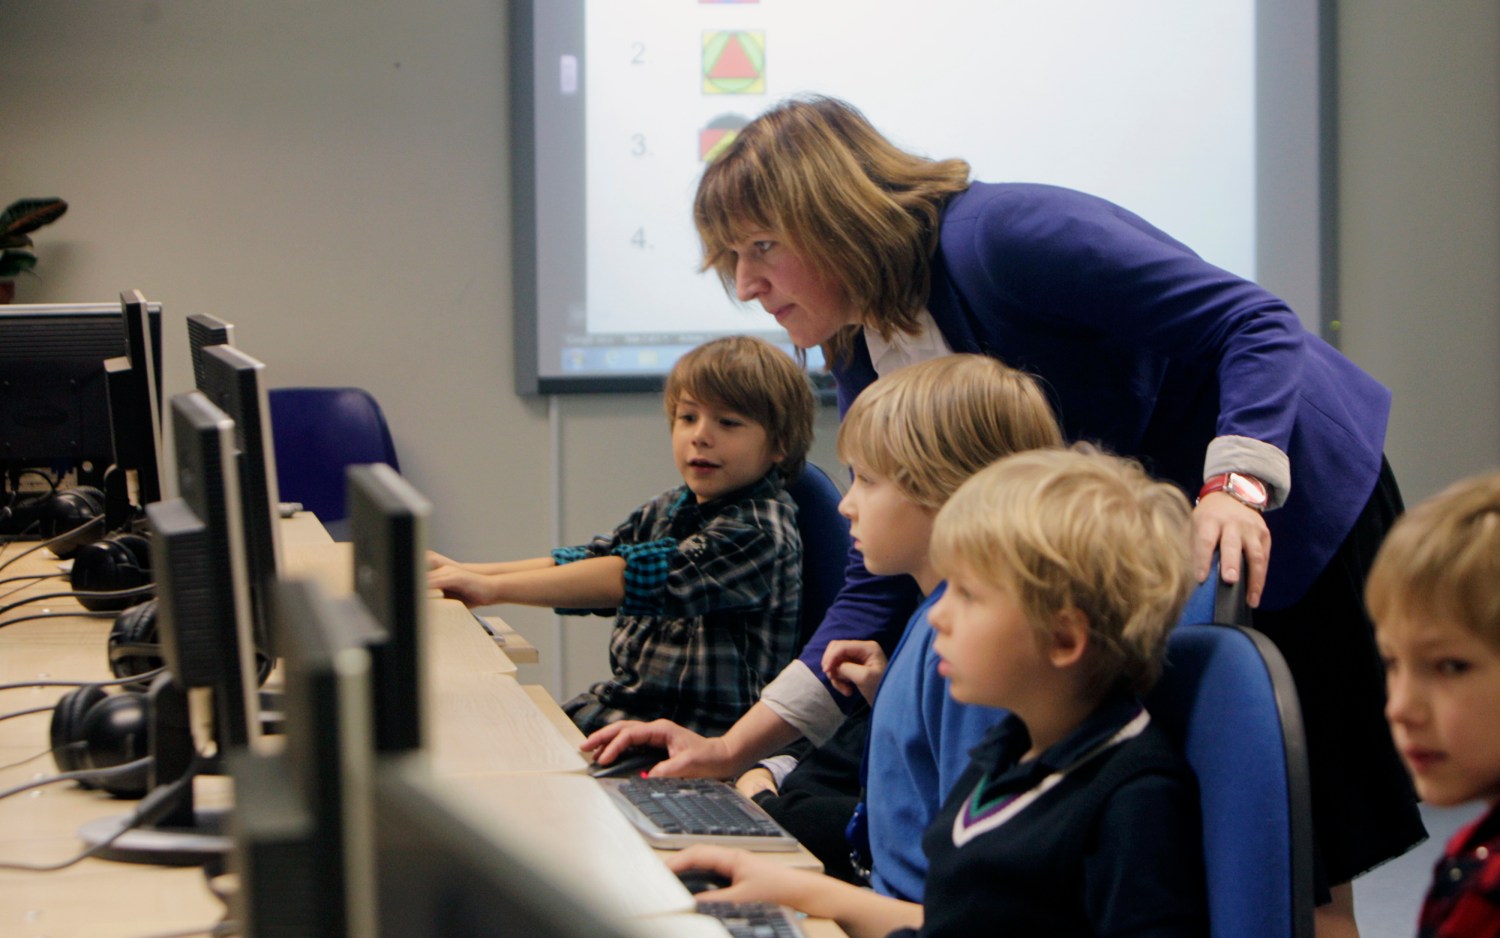 Teacher Kristi Rahn (C) helps to first grade students during a computer lesson in school in Tallinn September 25, 2012. Estonian Tiger Leap Foundation has launched a program called "ProgeTiiger" where Estonian students will be introduced to computer programming and creating web and mobile applications. According to representatives from the foundation, the program will start with students in the first grade, which starts around the age of 7, and will continue through a student's final years of public school, around age 15.  REUTERS/Ints Kalnins (ESTONIA - Tags: EDUCATION SCIENCE TECHNOLOGY) - GM1E89P1PG901